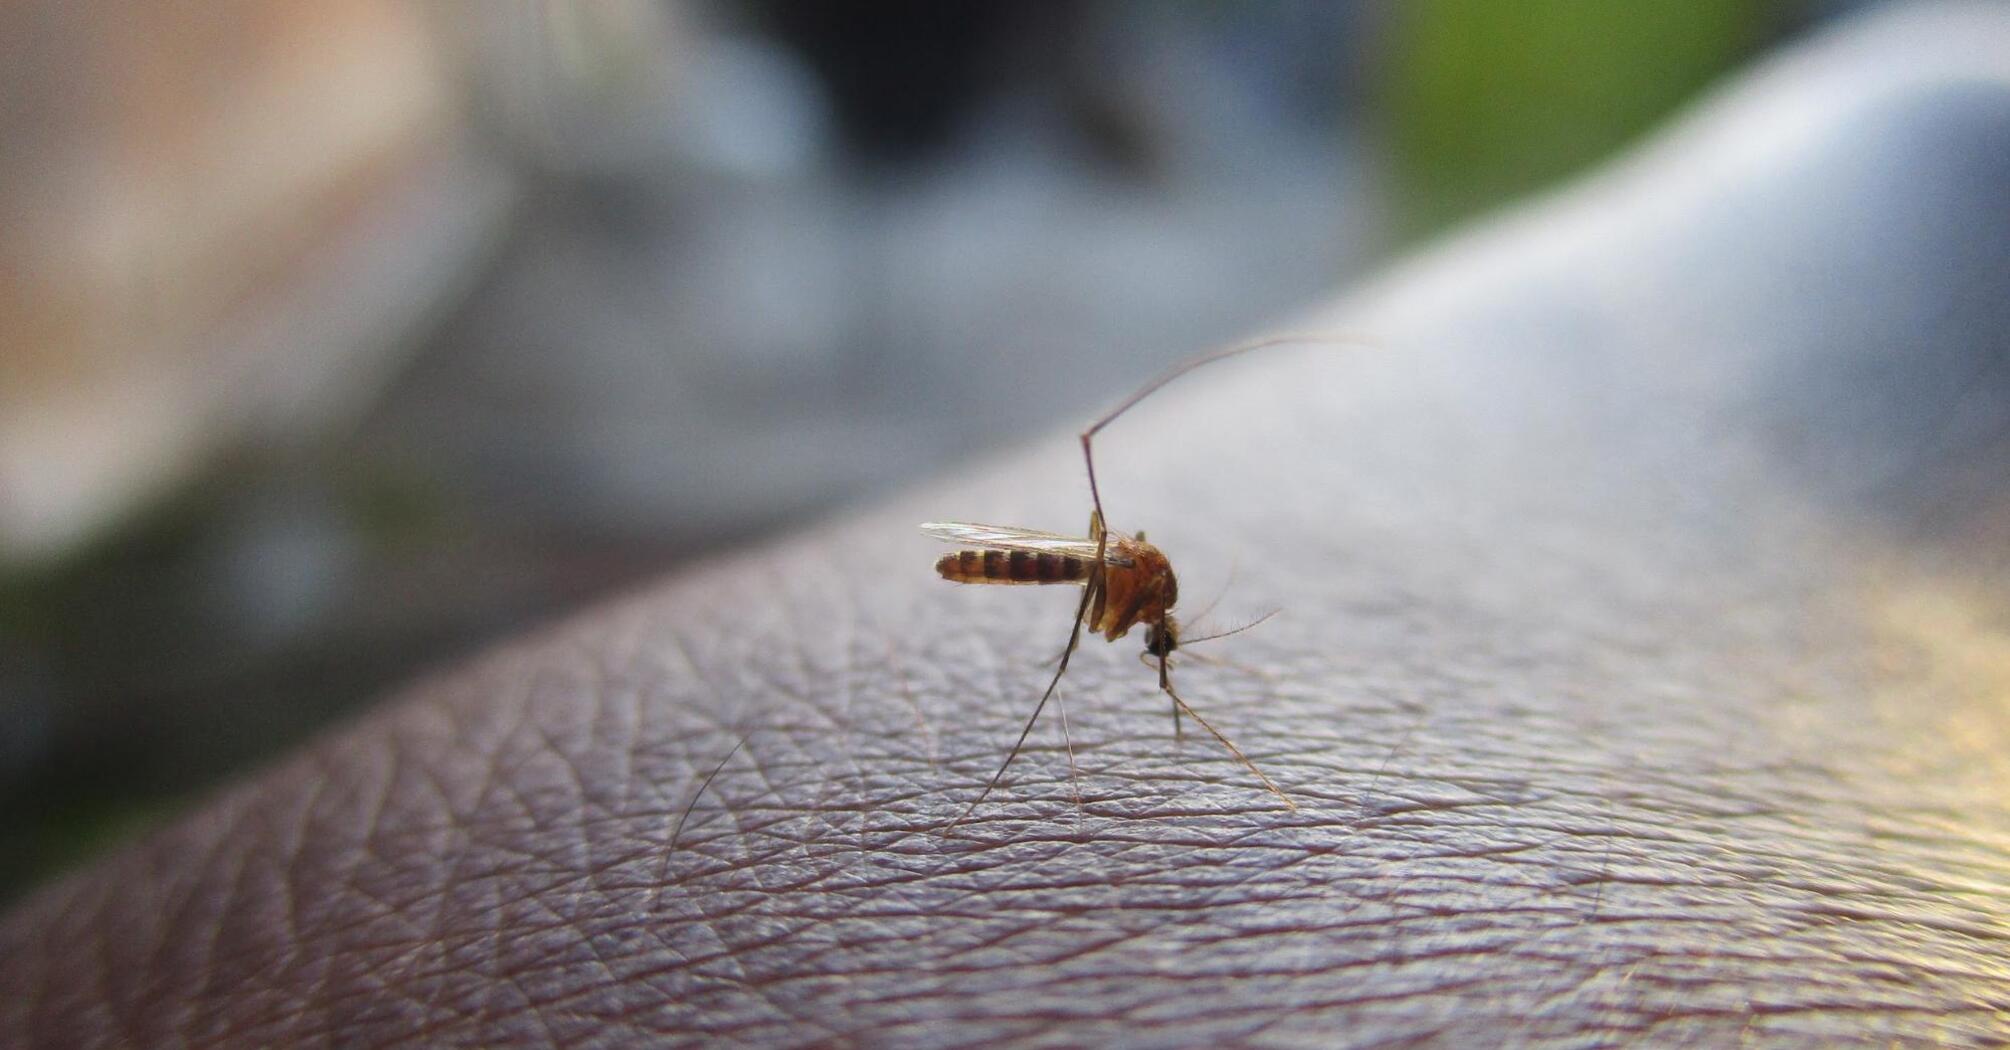 A mosquito resting on the skin, ready to bite